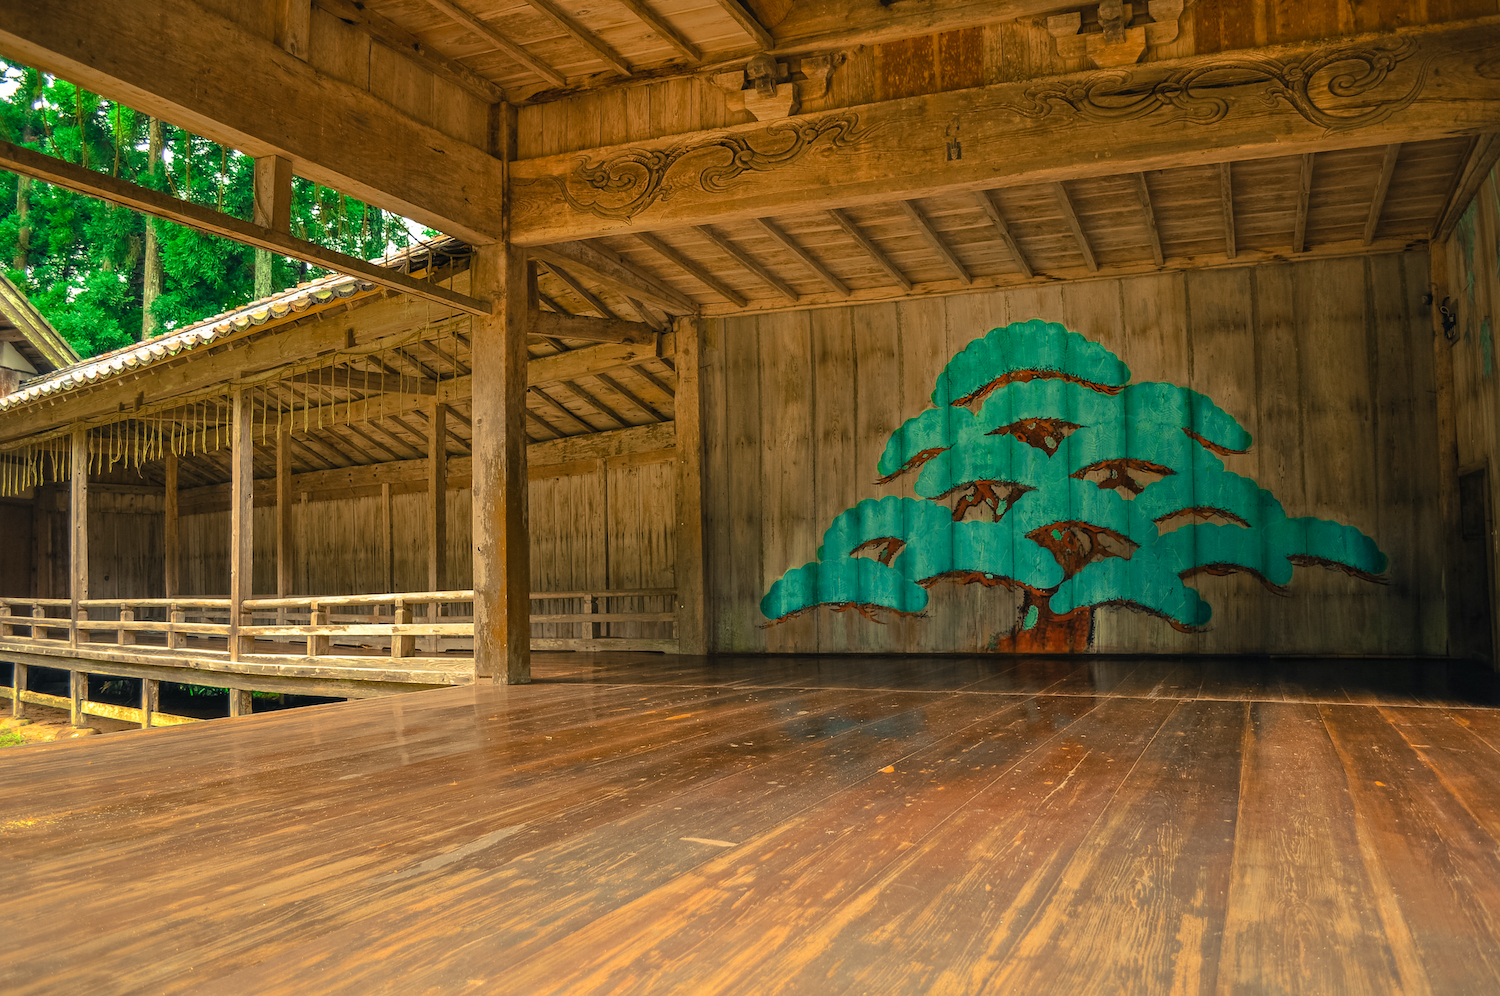 Sado, Niigata / Japan - August 6 2013: A wooden stage for Noh, a classical Japanese musical drama seen in Ushio Shrine